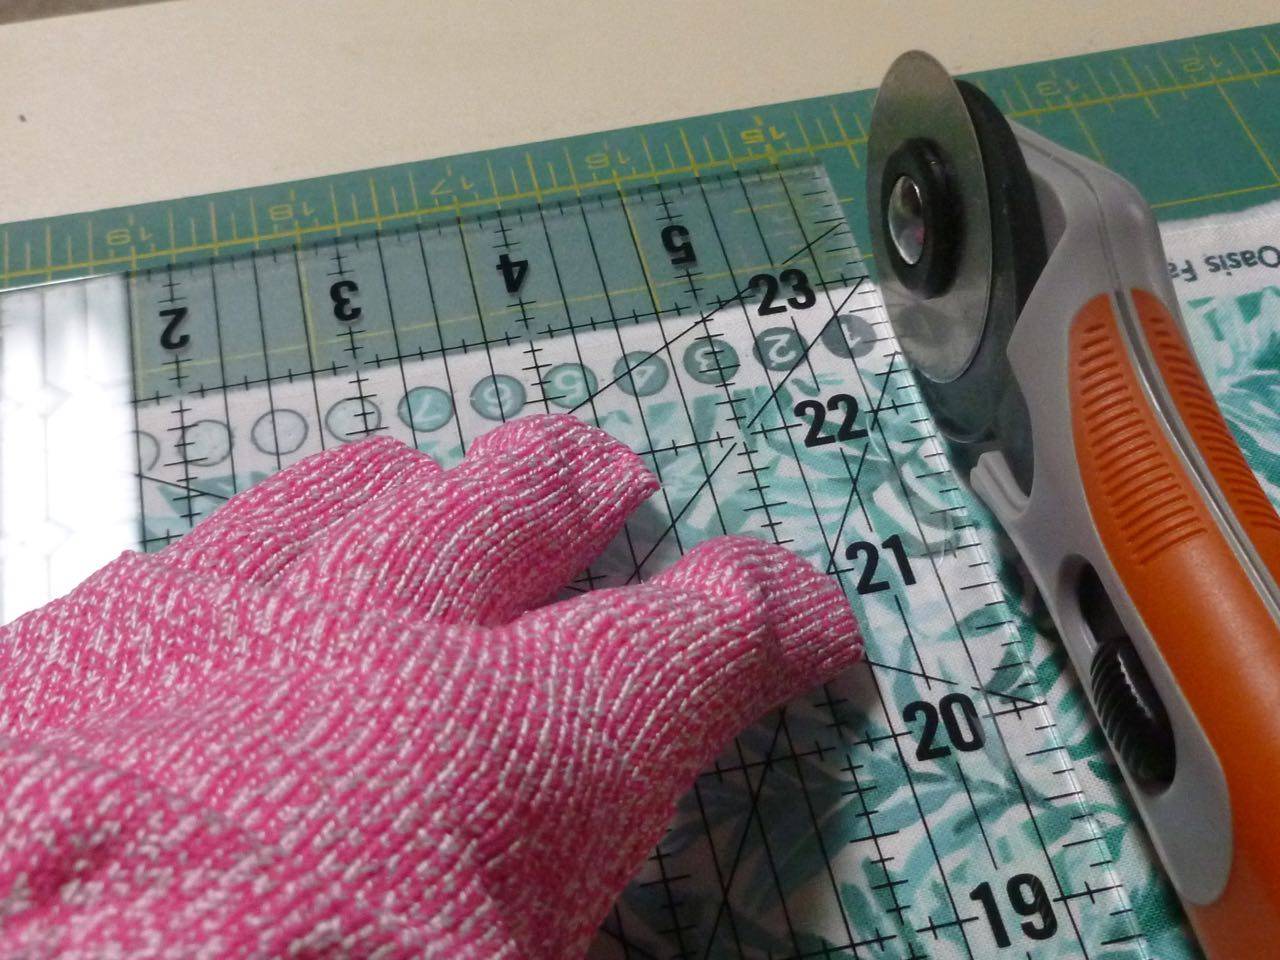 Rotary Cutter Basics and Tips